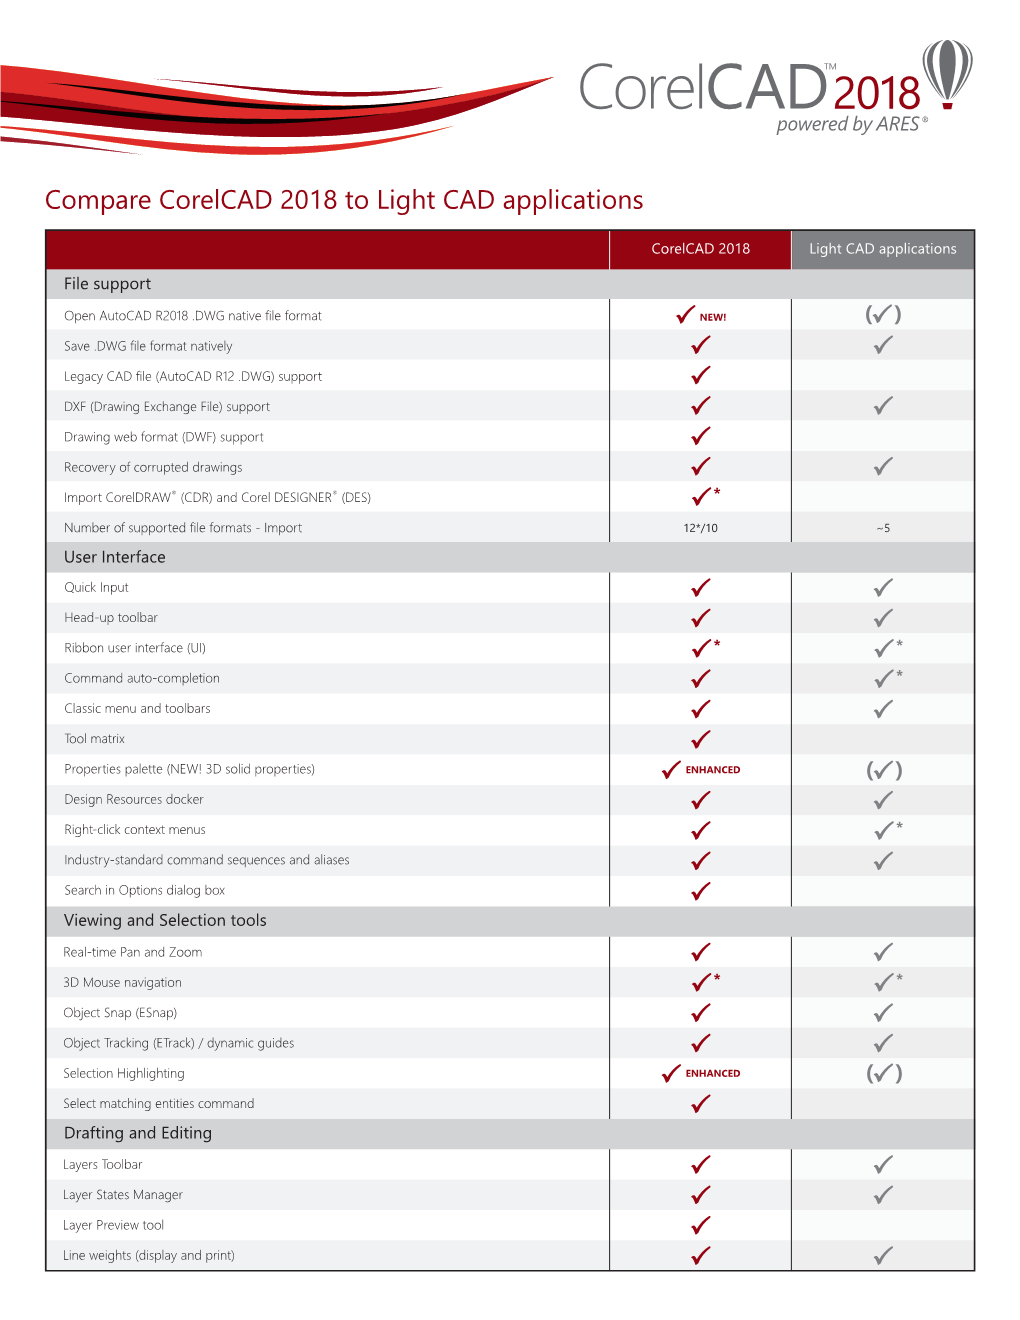 Compare Corelcad 2018 to Light CAD Applications